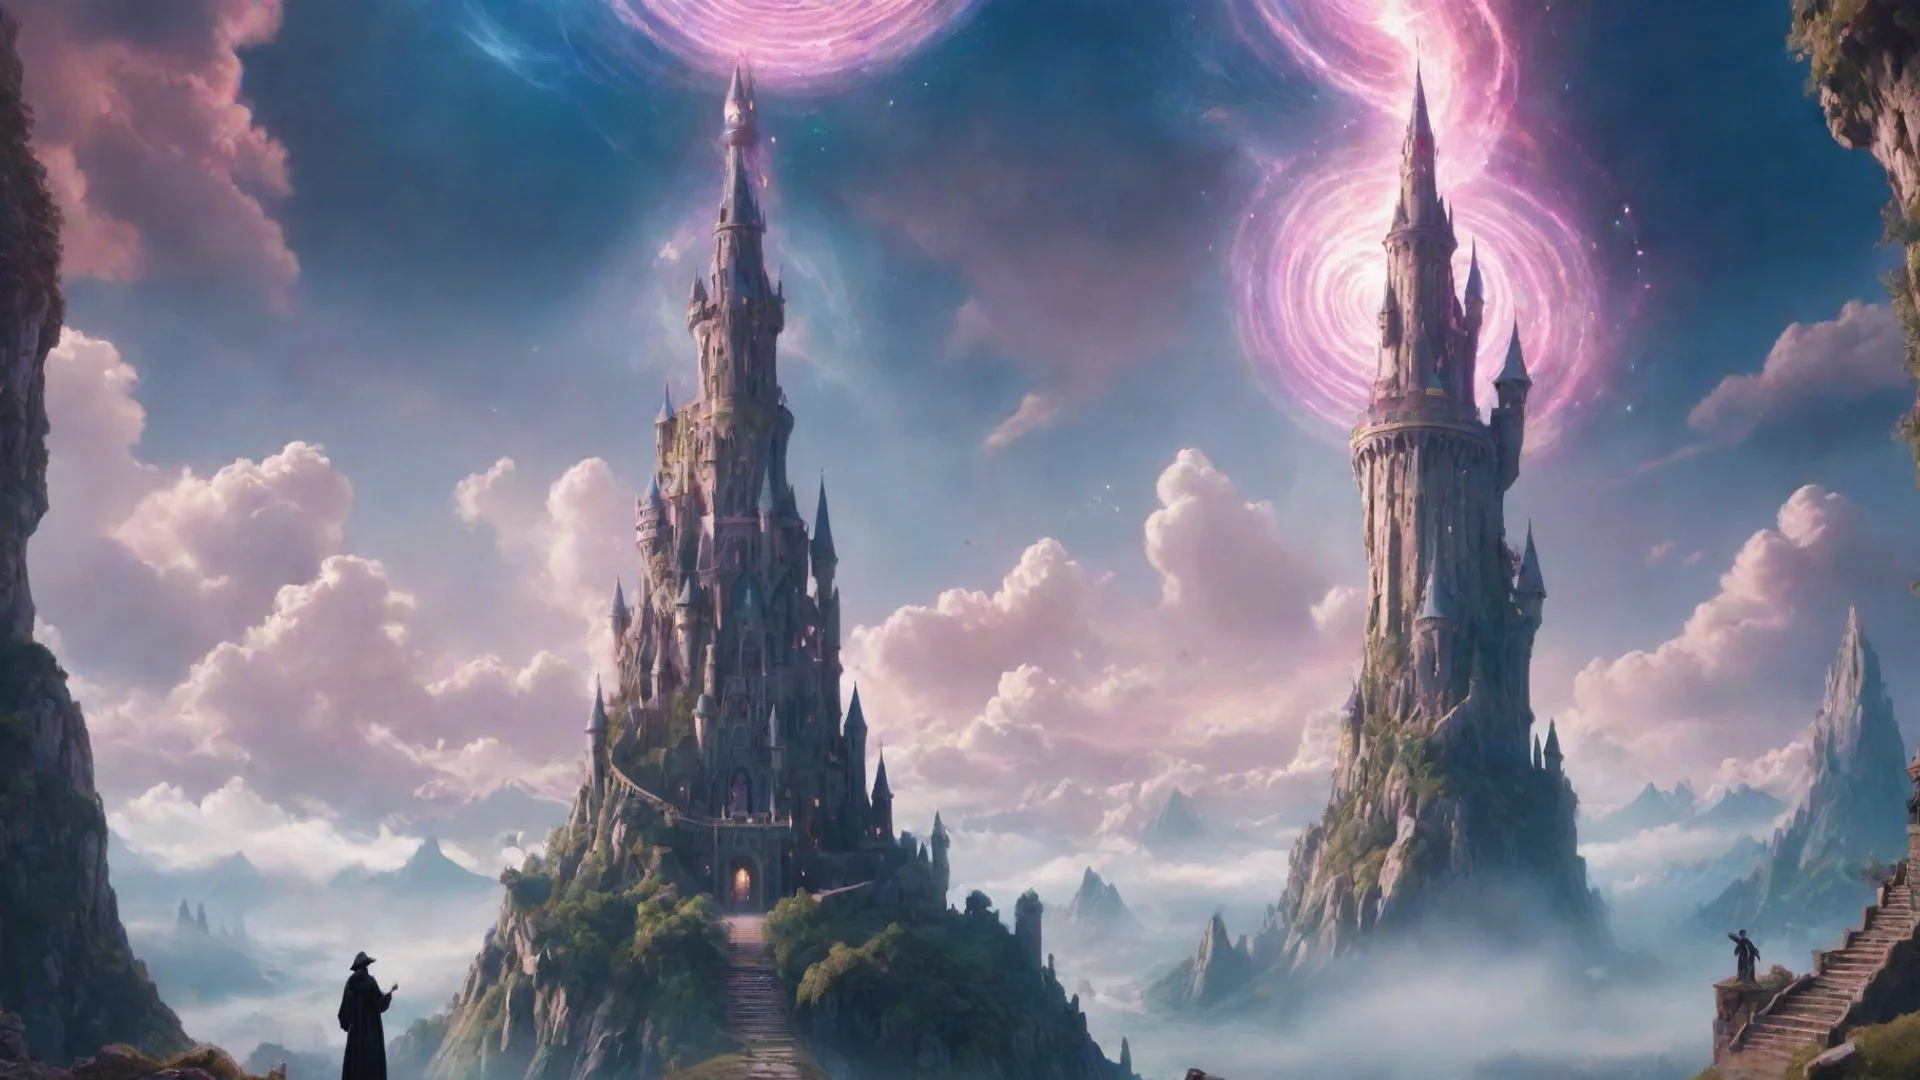 aiamazing magical world with a wizard looking a spiraling impossible tower hd aesthetic omg awesome portrait 2 wide